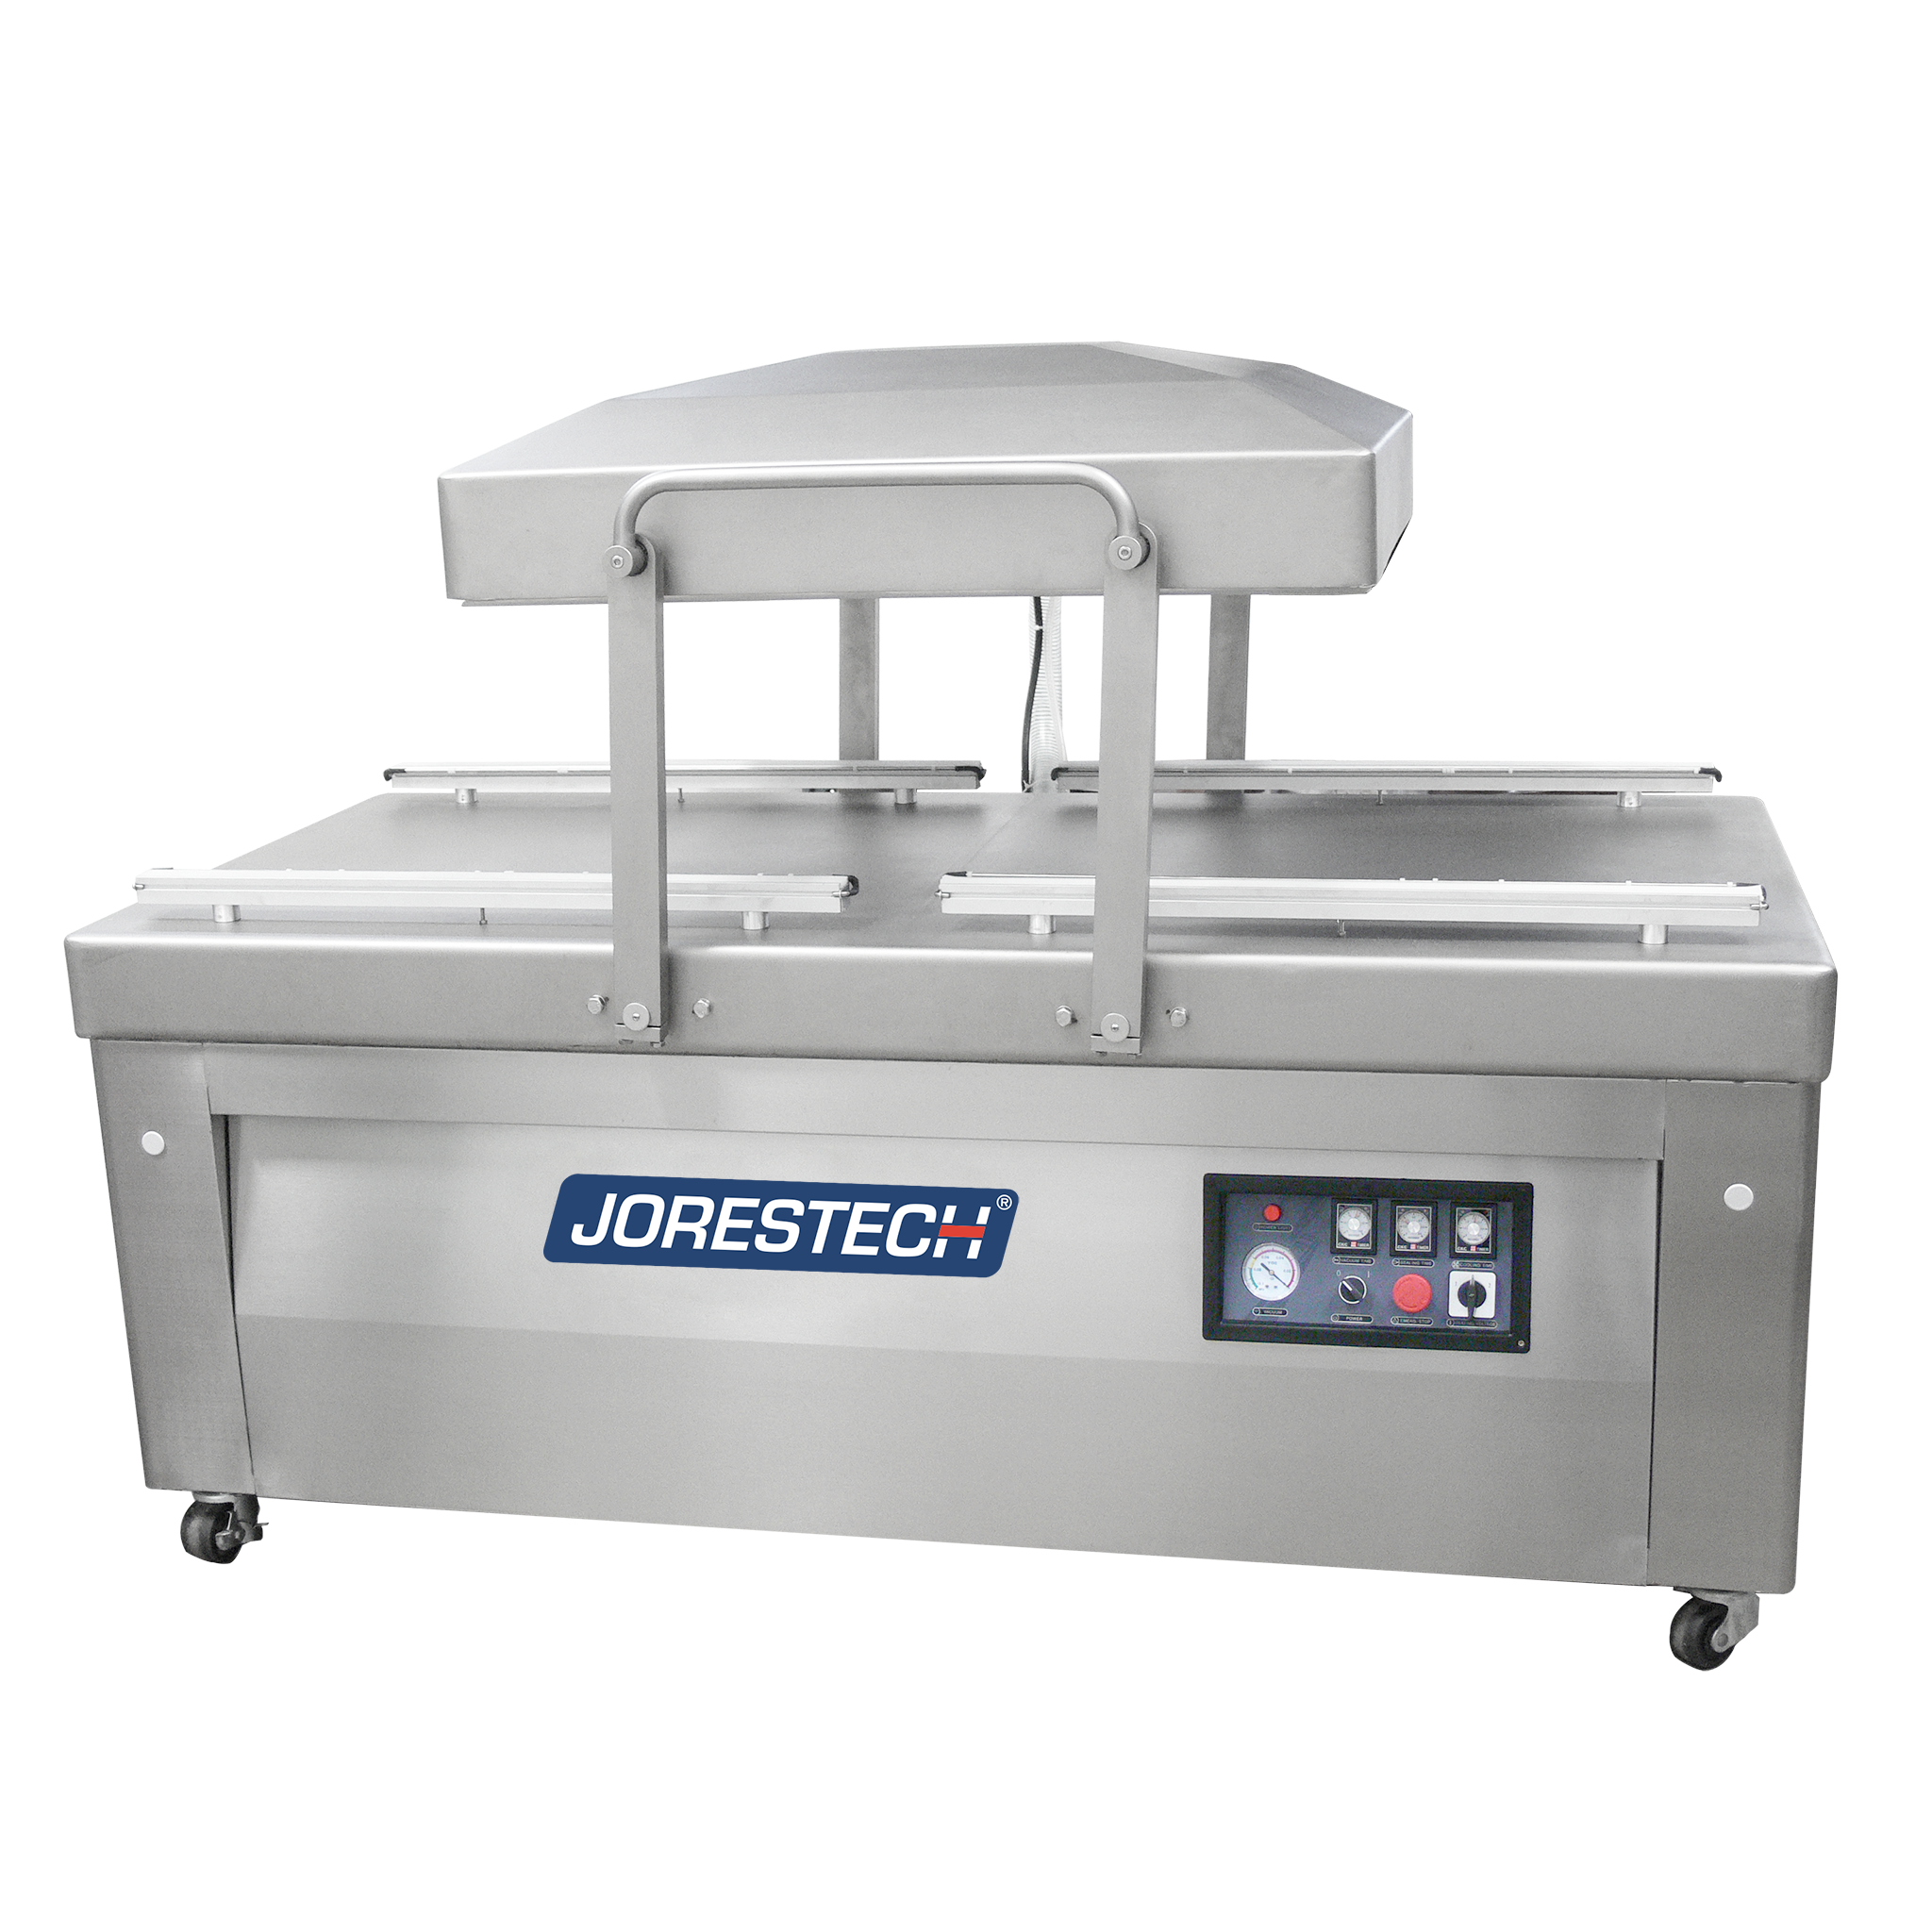 https://cdn.shopify.com/s/files/1/0517/5692/5094/products/COMMERCIAL-DOBLE-CHAMBER-VACUUM-SEALER-WITH-32-INCHES-SEAL-BAR-220V-E-VAC-820-FD-JORESTECH-H1.png?v=1674682694